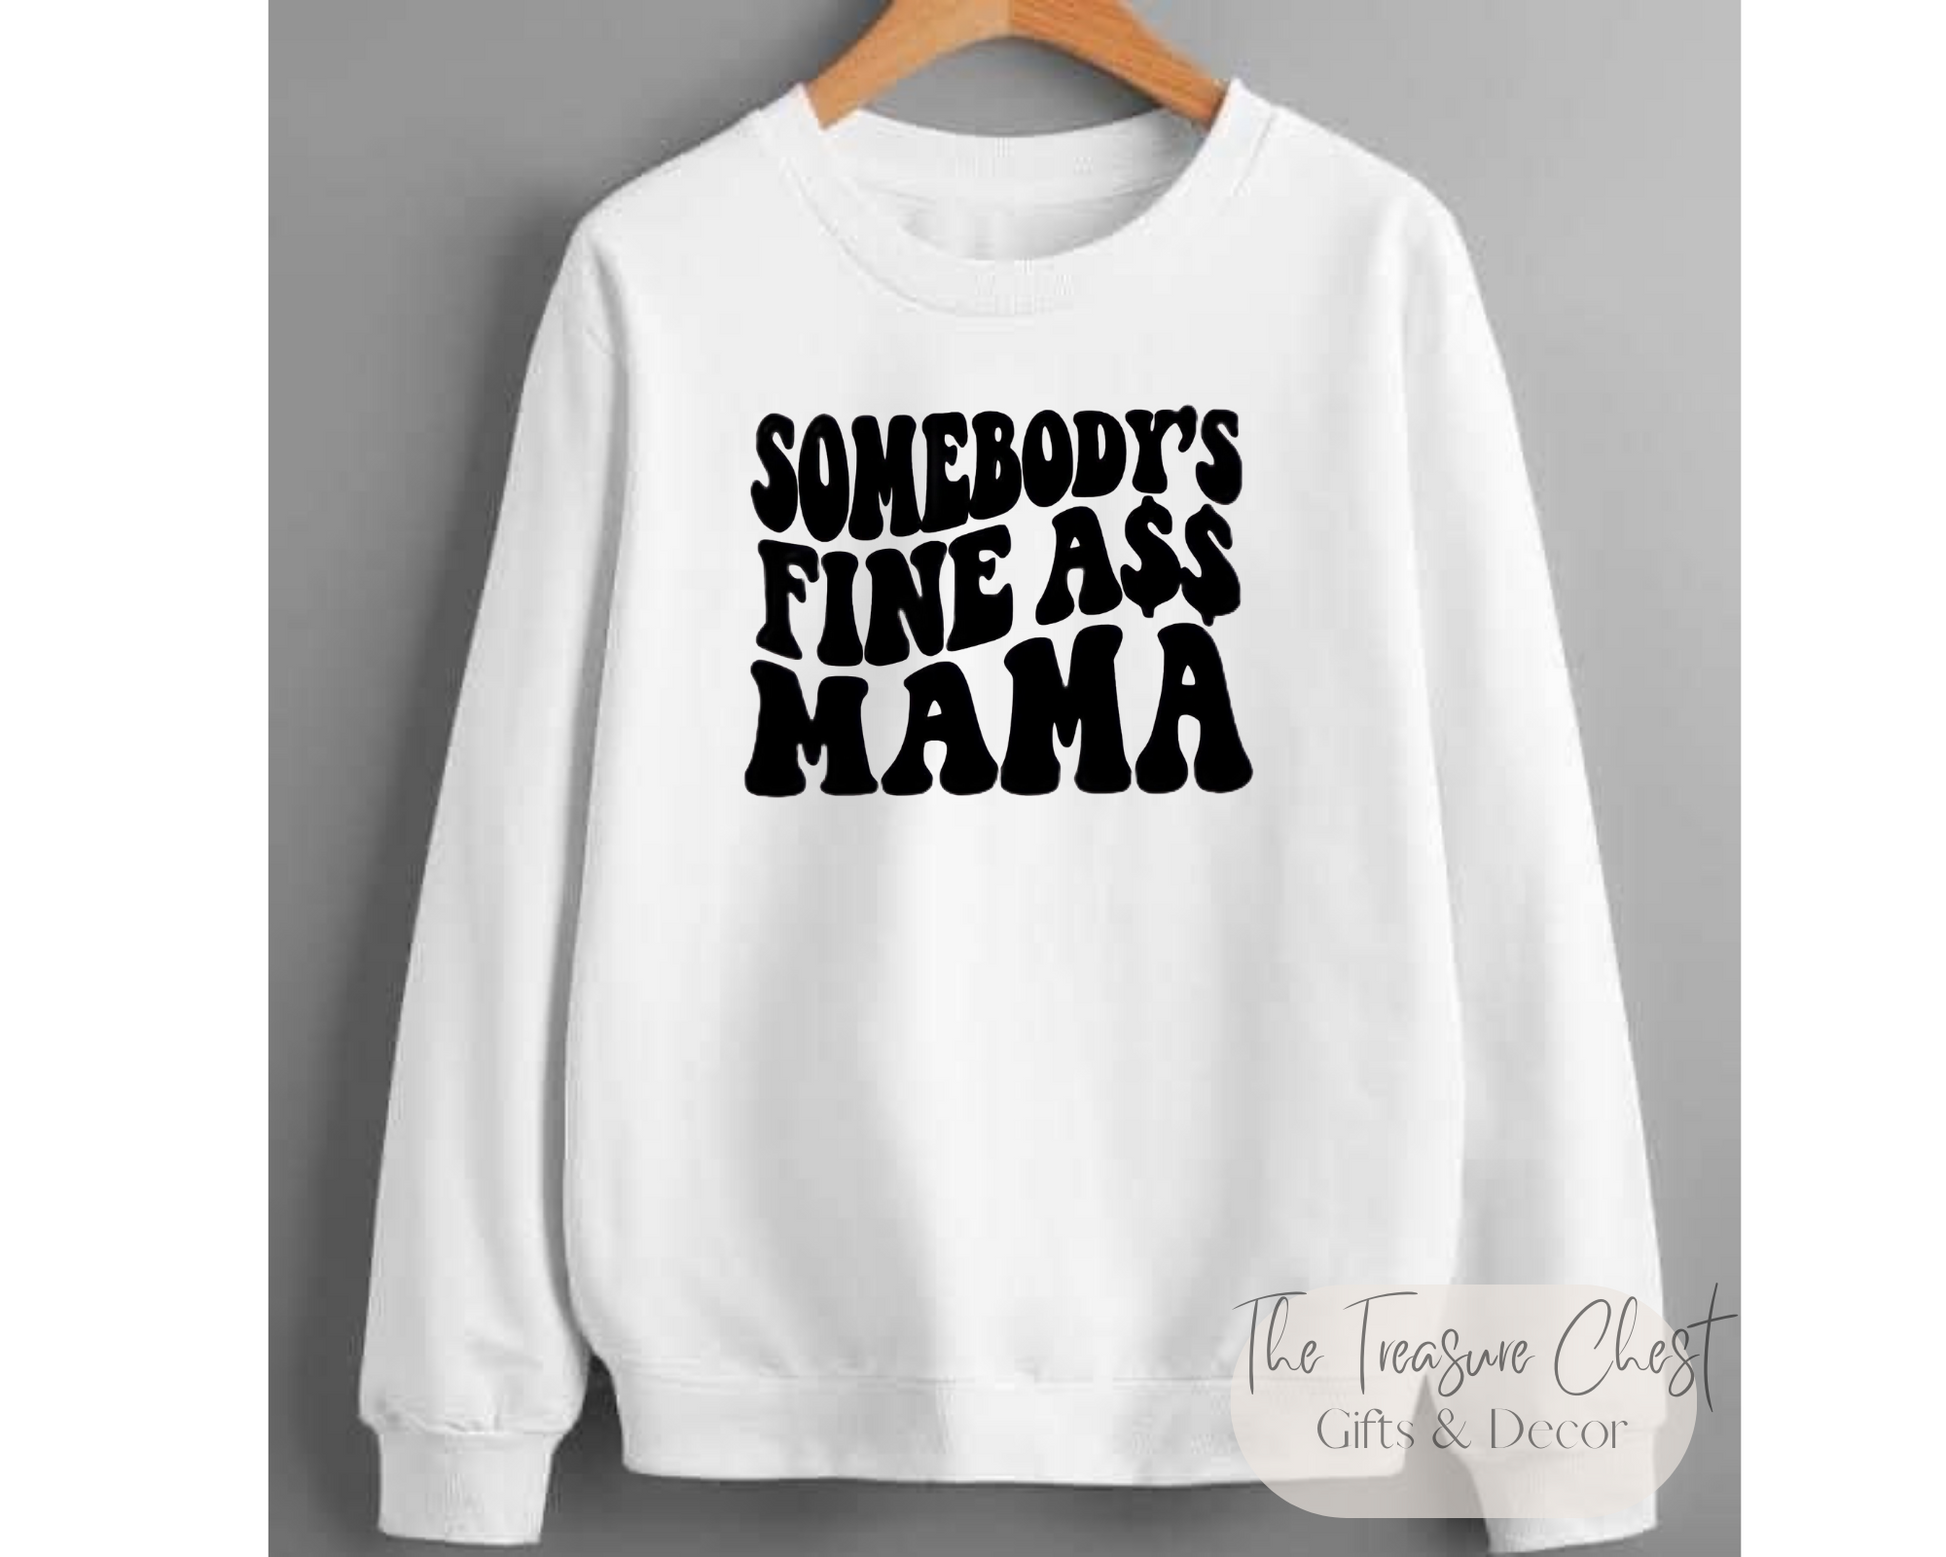 Make a statement with this hilarious Somebody's Fine Ass Mama Crewneck Sweatshirt! Show off your sense of humour in the most stylish way possible with this classic crewneck. This soft, comfortable, and lightweight fabric is perfect for all-day wear, making it a must-have for any wardrobe. White in colour